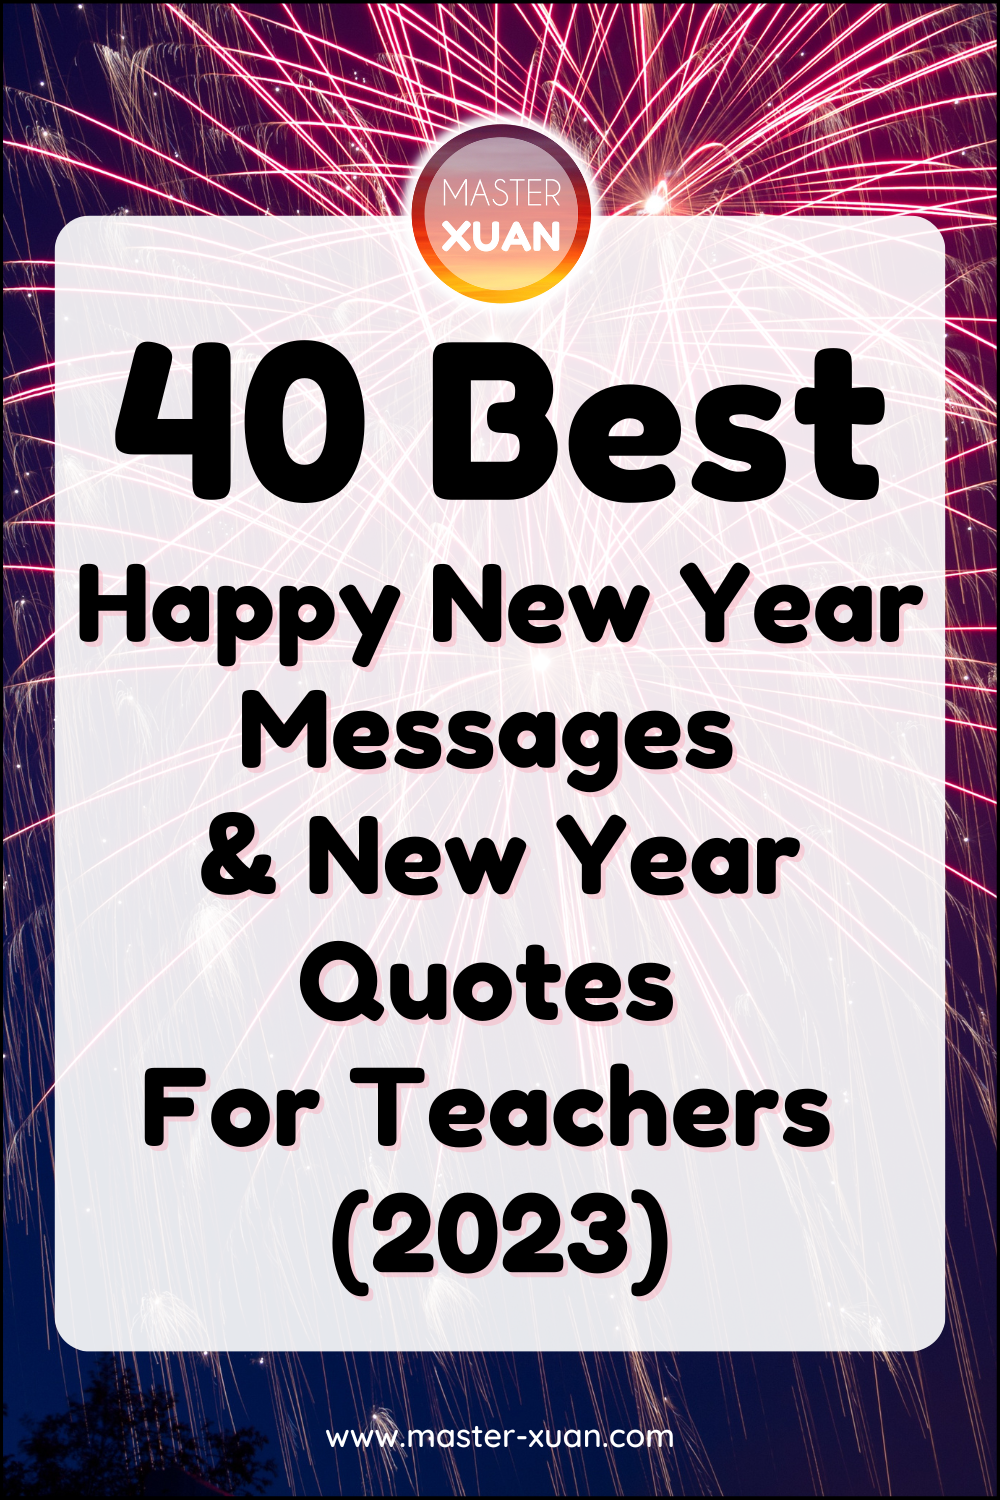 happy new year messages & new year quotes for teachers 2023